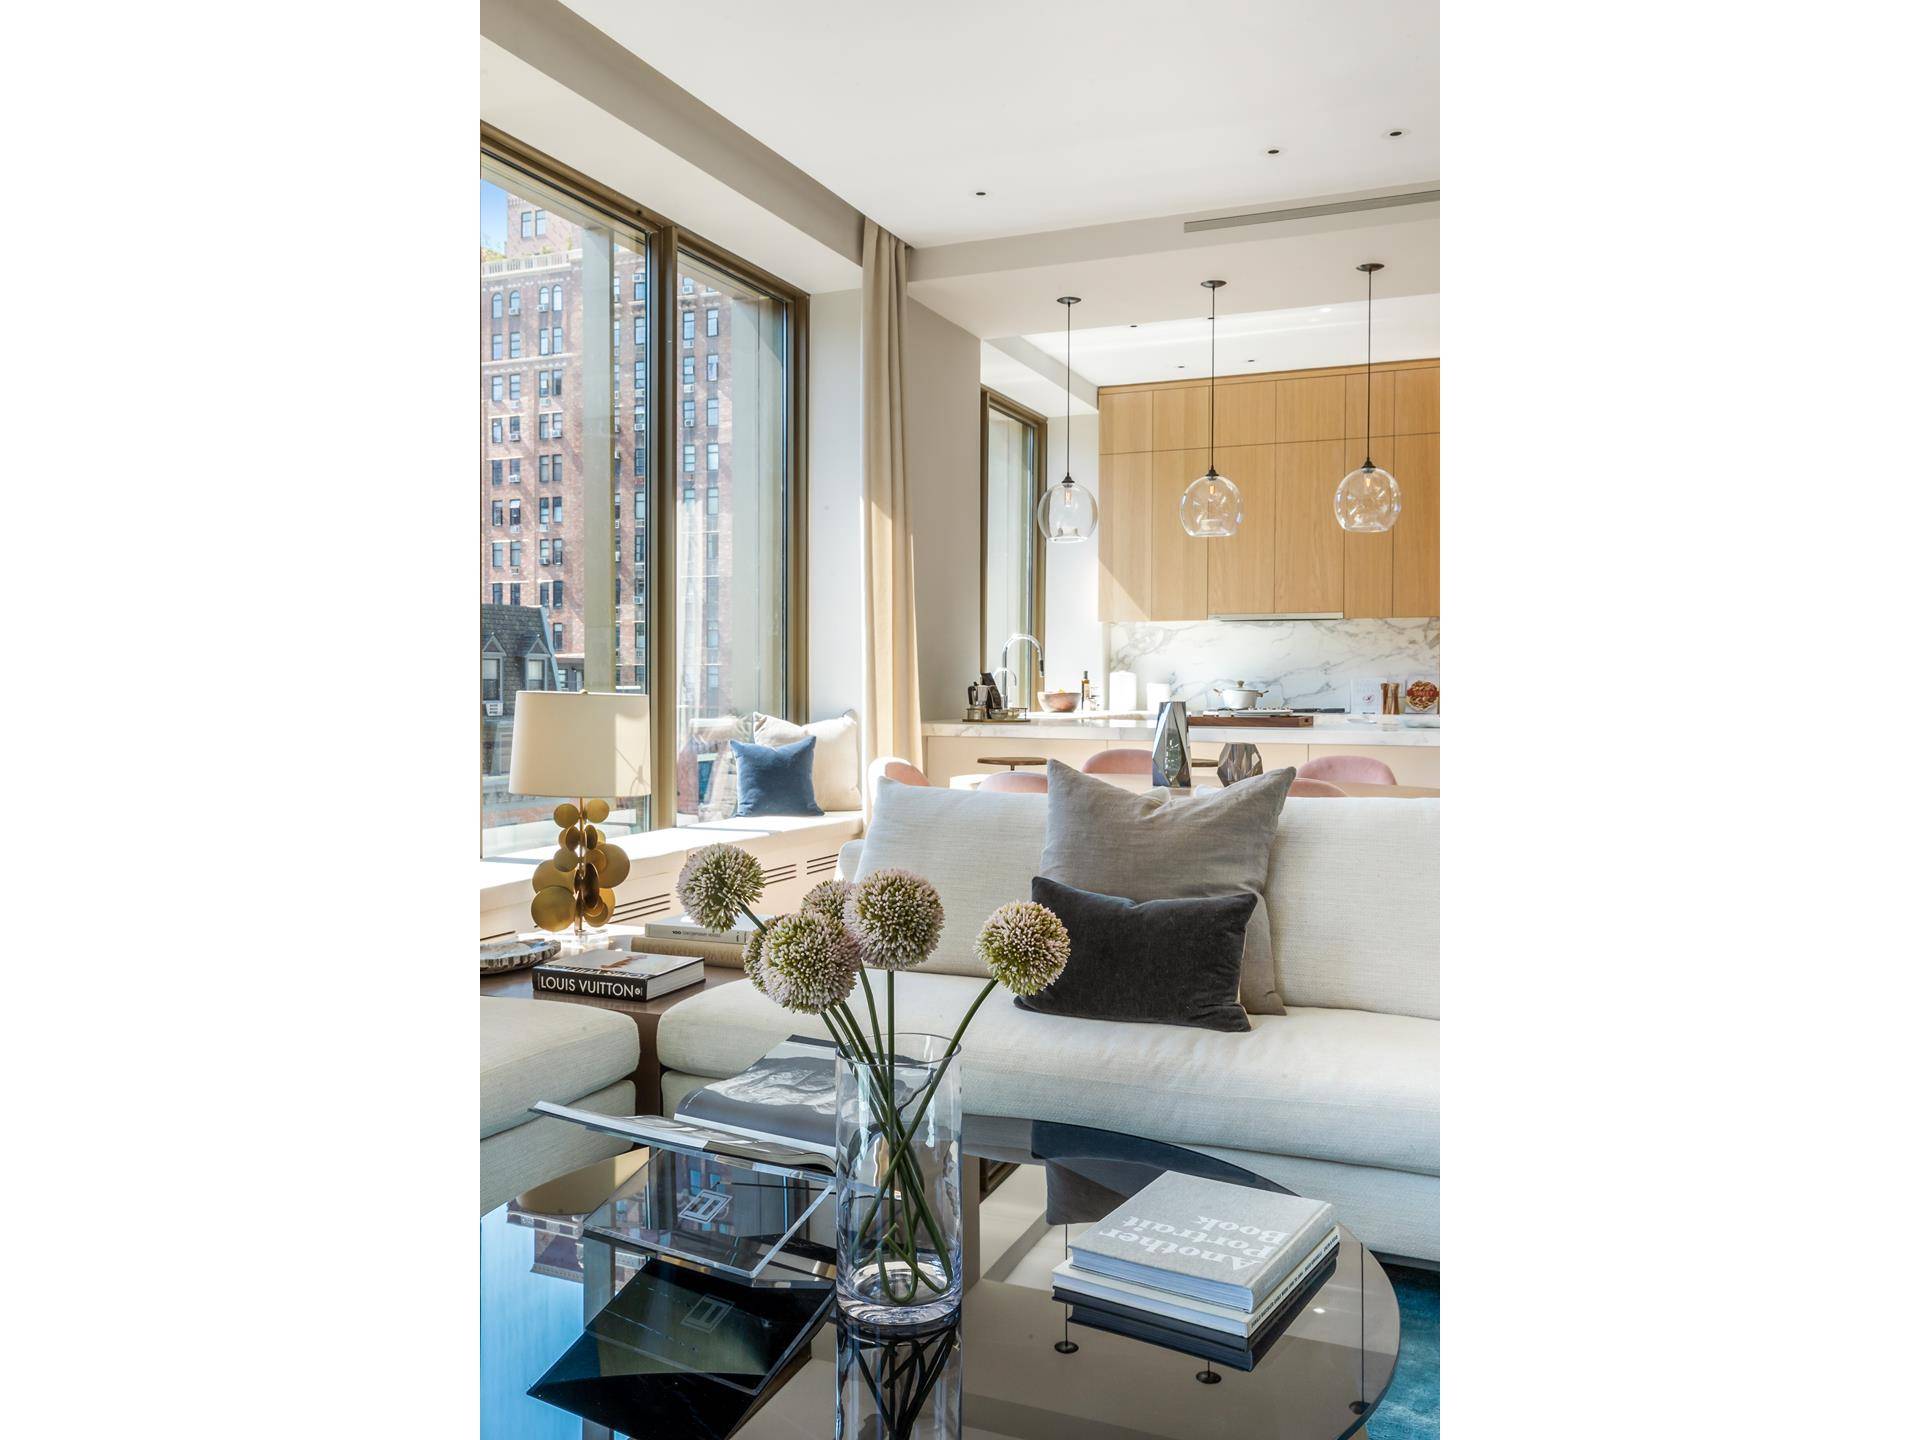 Welcome to The Emerson at 500 West 25th Street, a beacon of elevated luxury and lifestyle in the heart of West Chelsea.